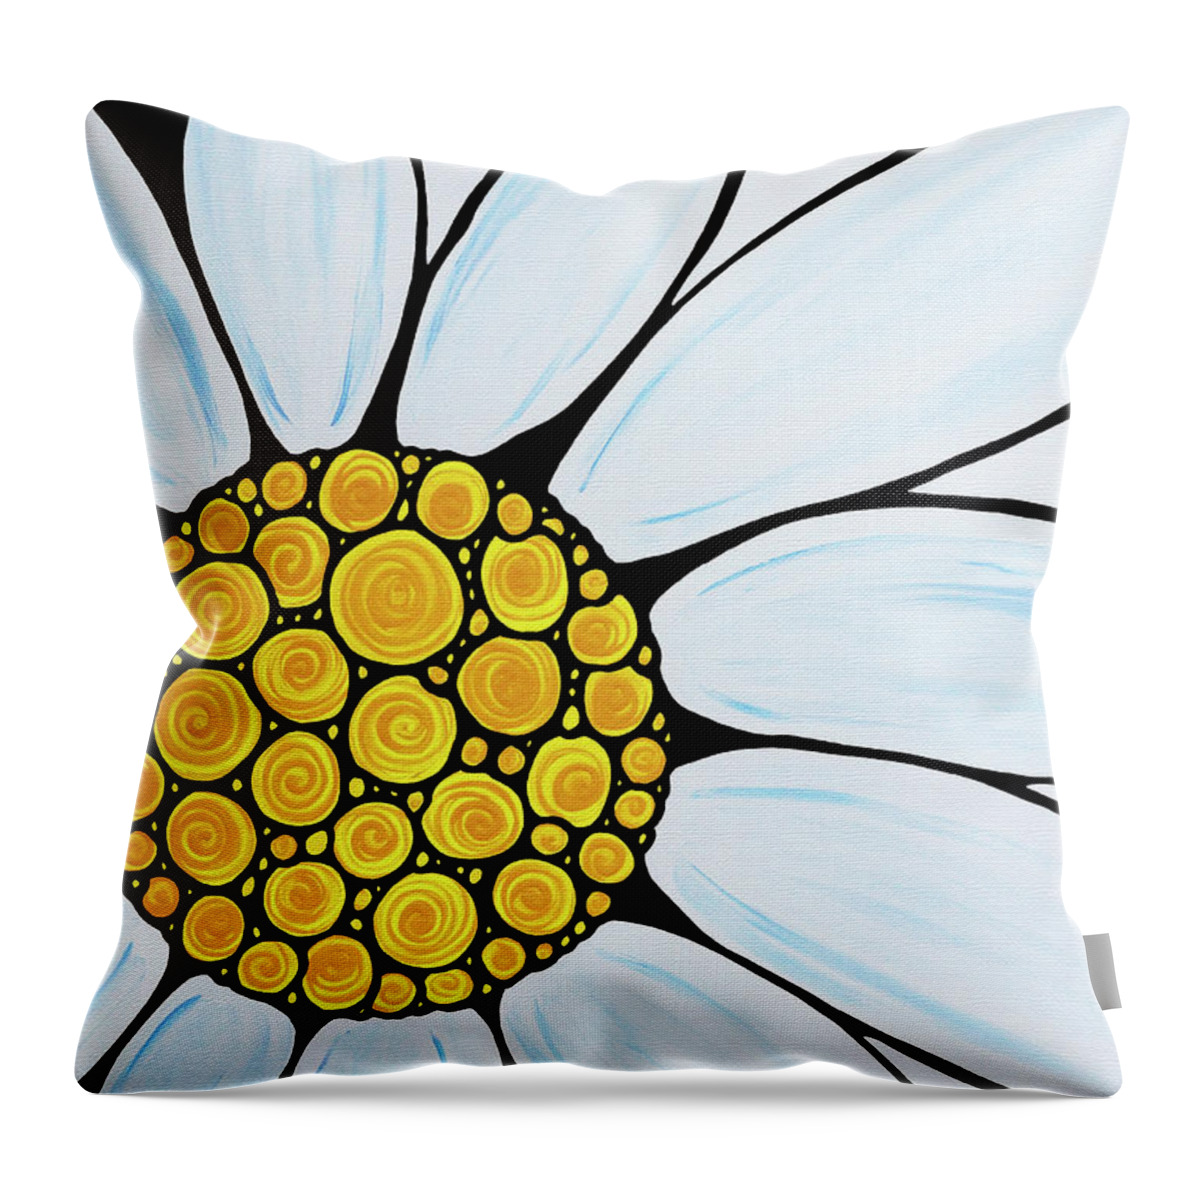 White Daisy Throw Pillow featuring the painting Big White Daisy by Sharon Cummings